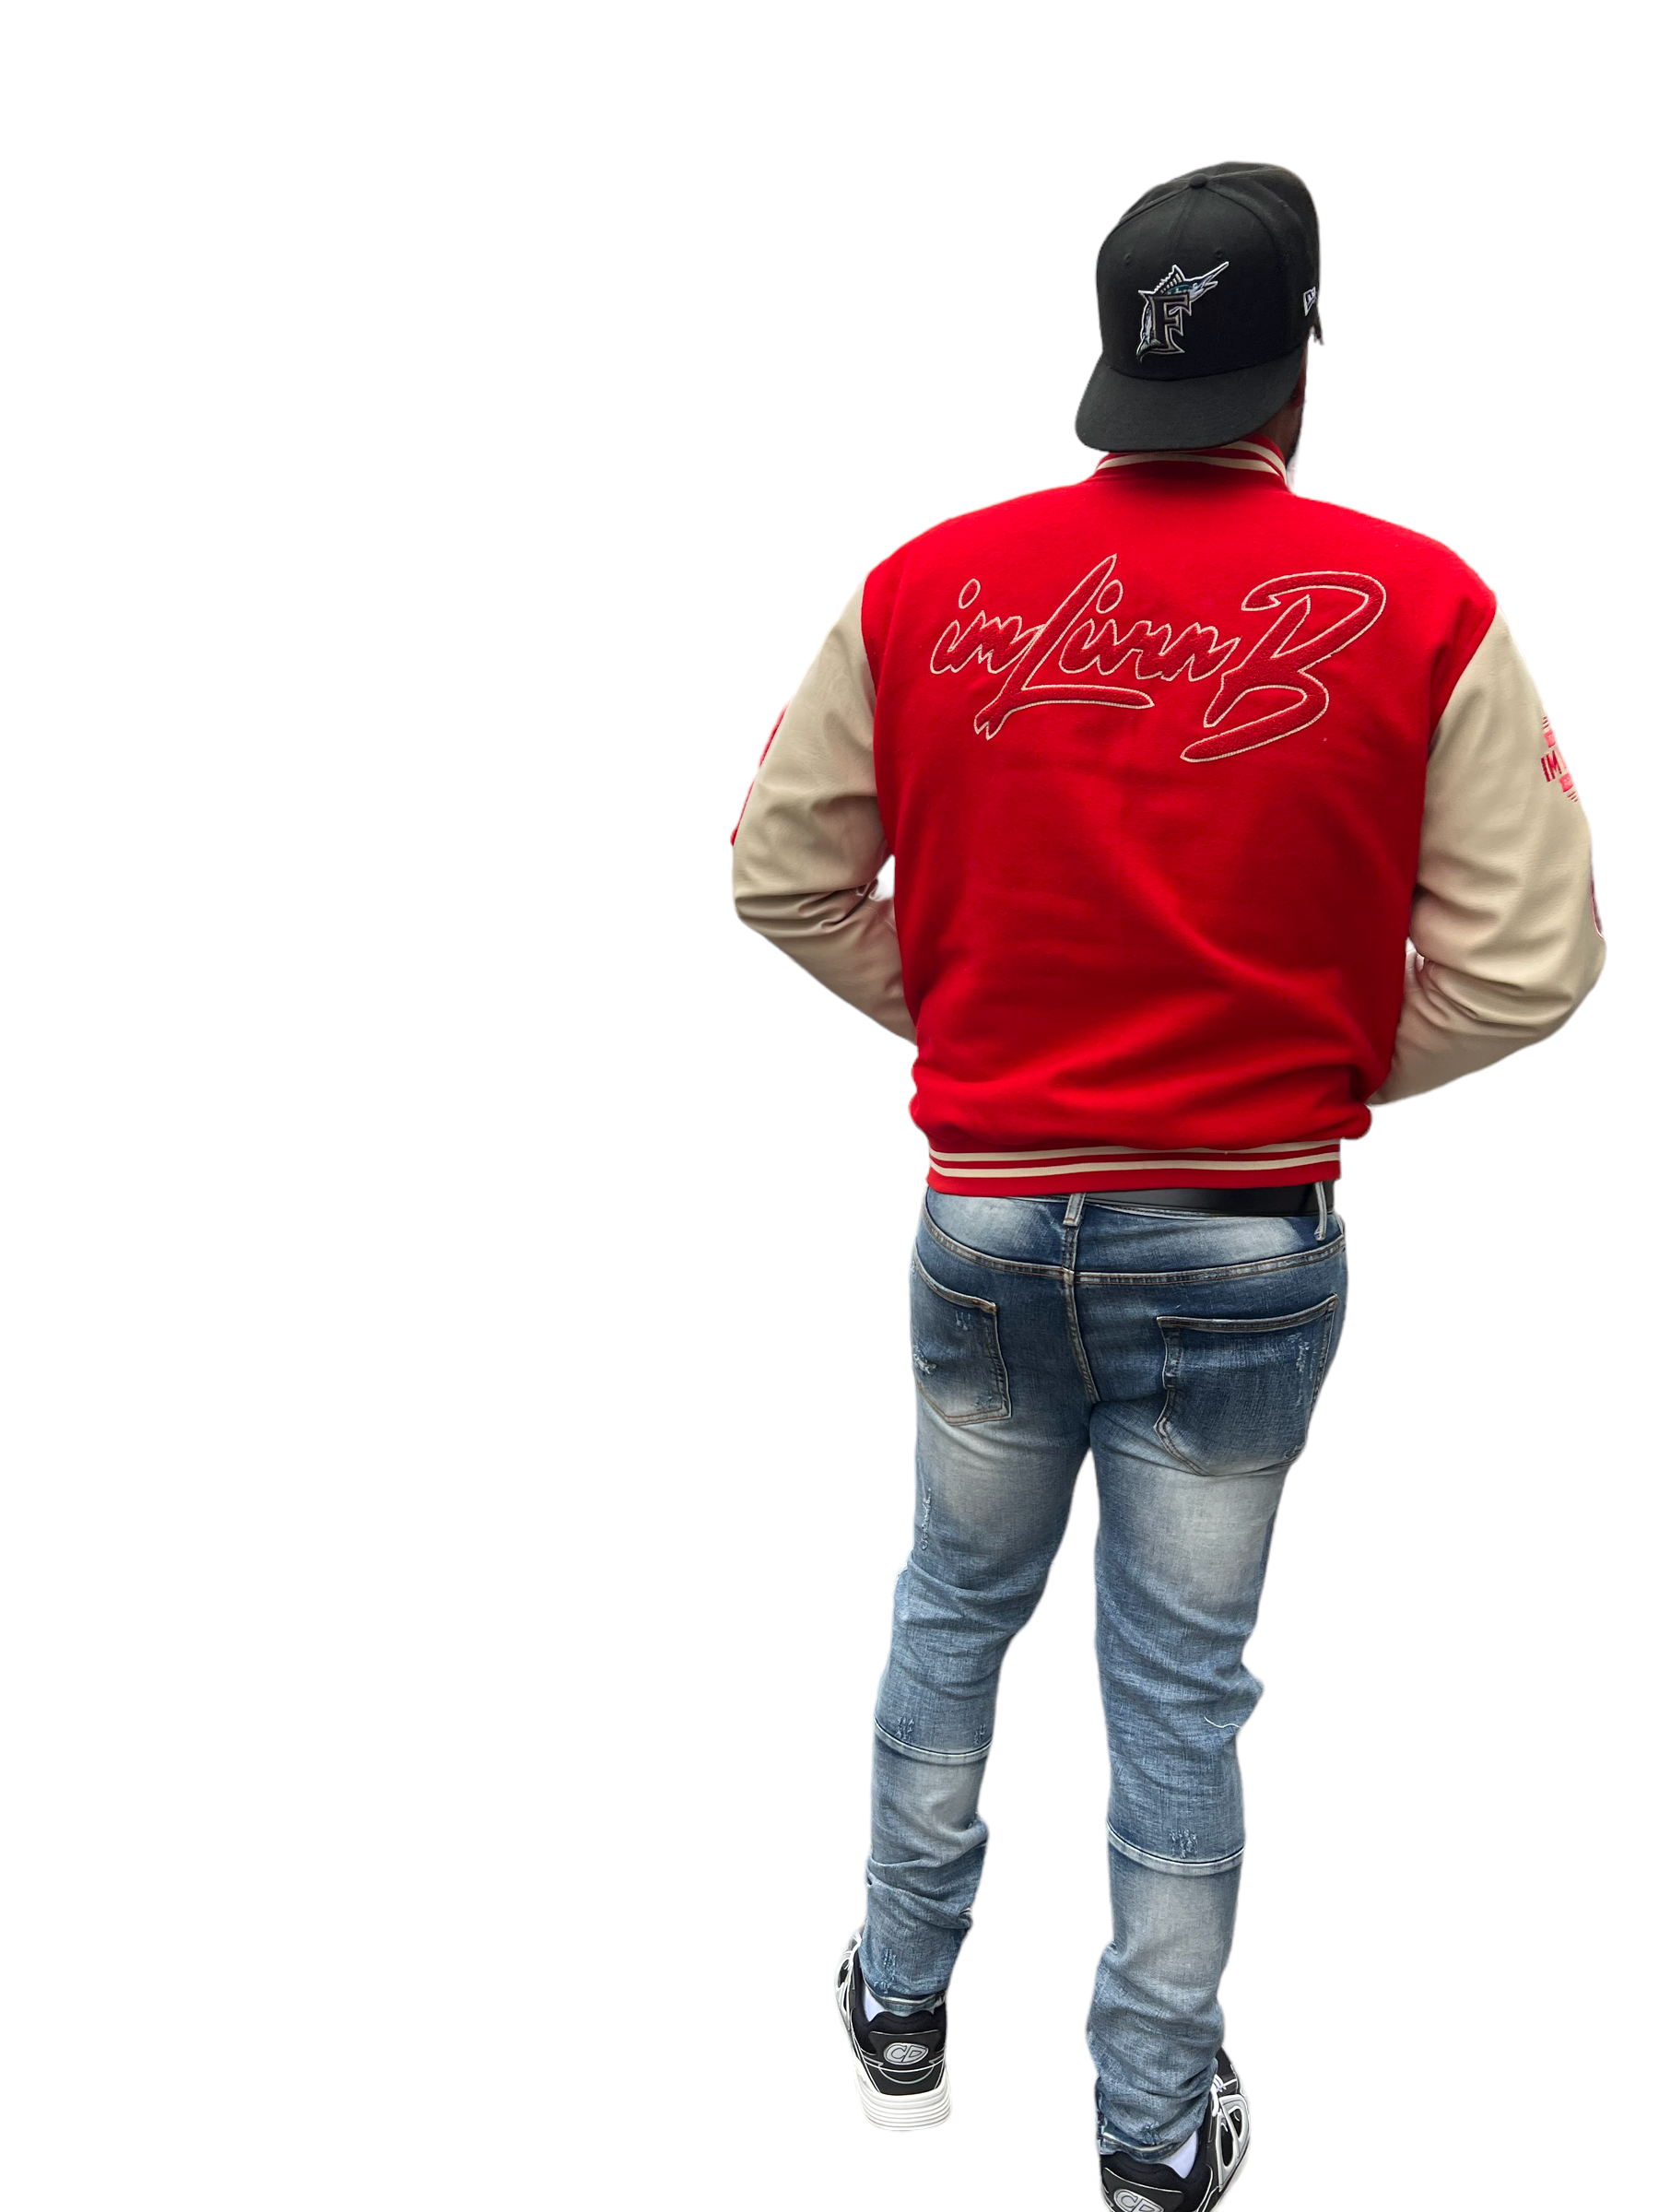 Product of the Streets LEATHER SLEEVES Varsity Jacket (Red/Tan